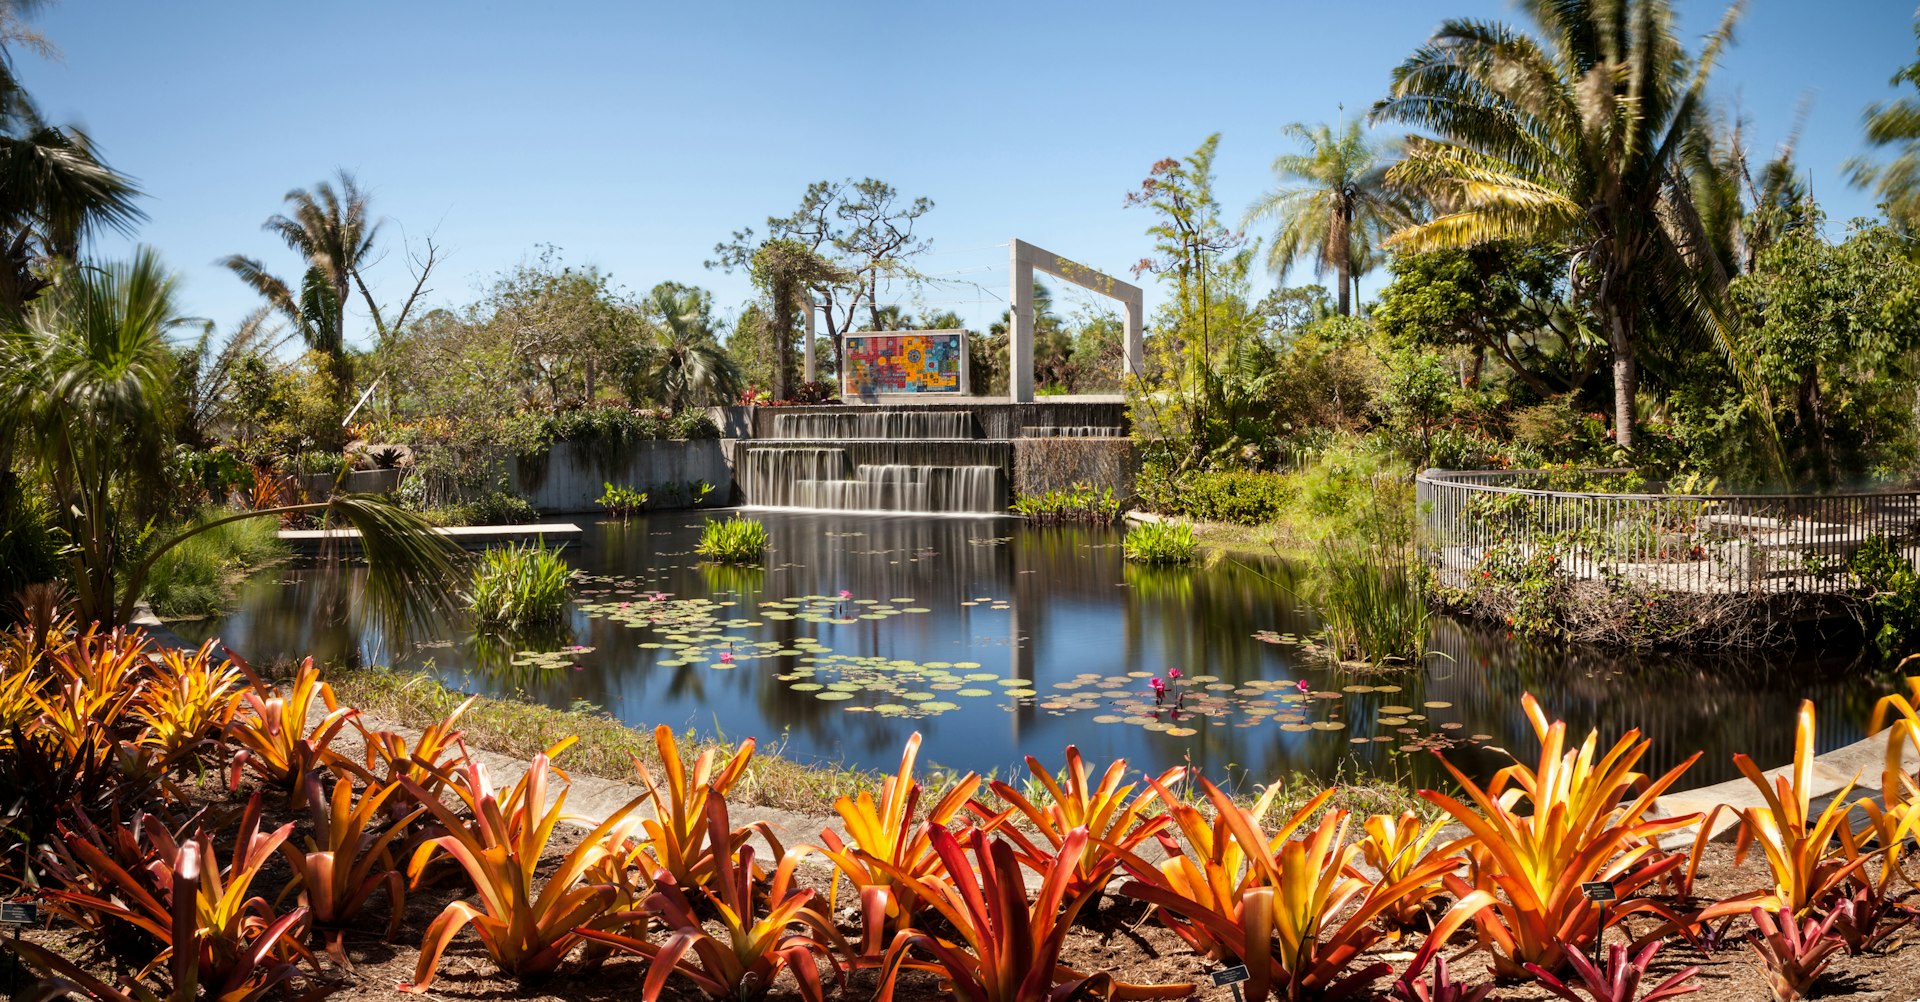 A pond filled with water lilies reflects the many tropical trees and plants that surround it at the Naples Botanical Gardens in Naples, Florida.